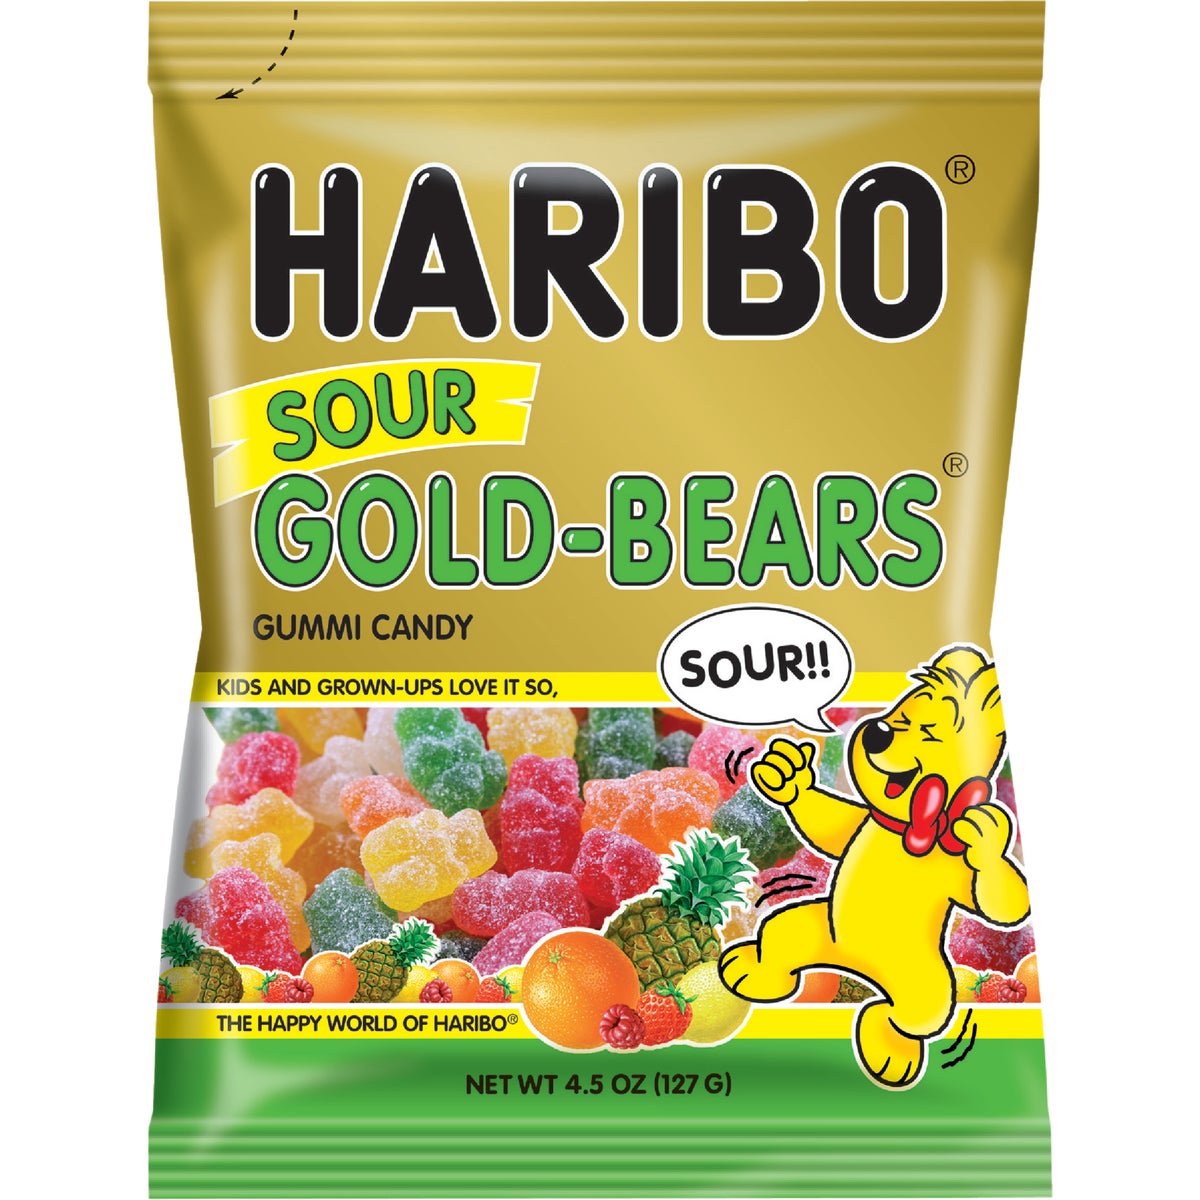 Haribo Gold-Bears Assorted Sour Fruit Flavor 4.5 Oz. Candy